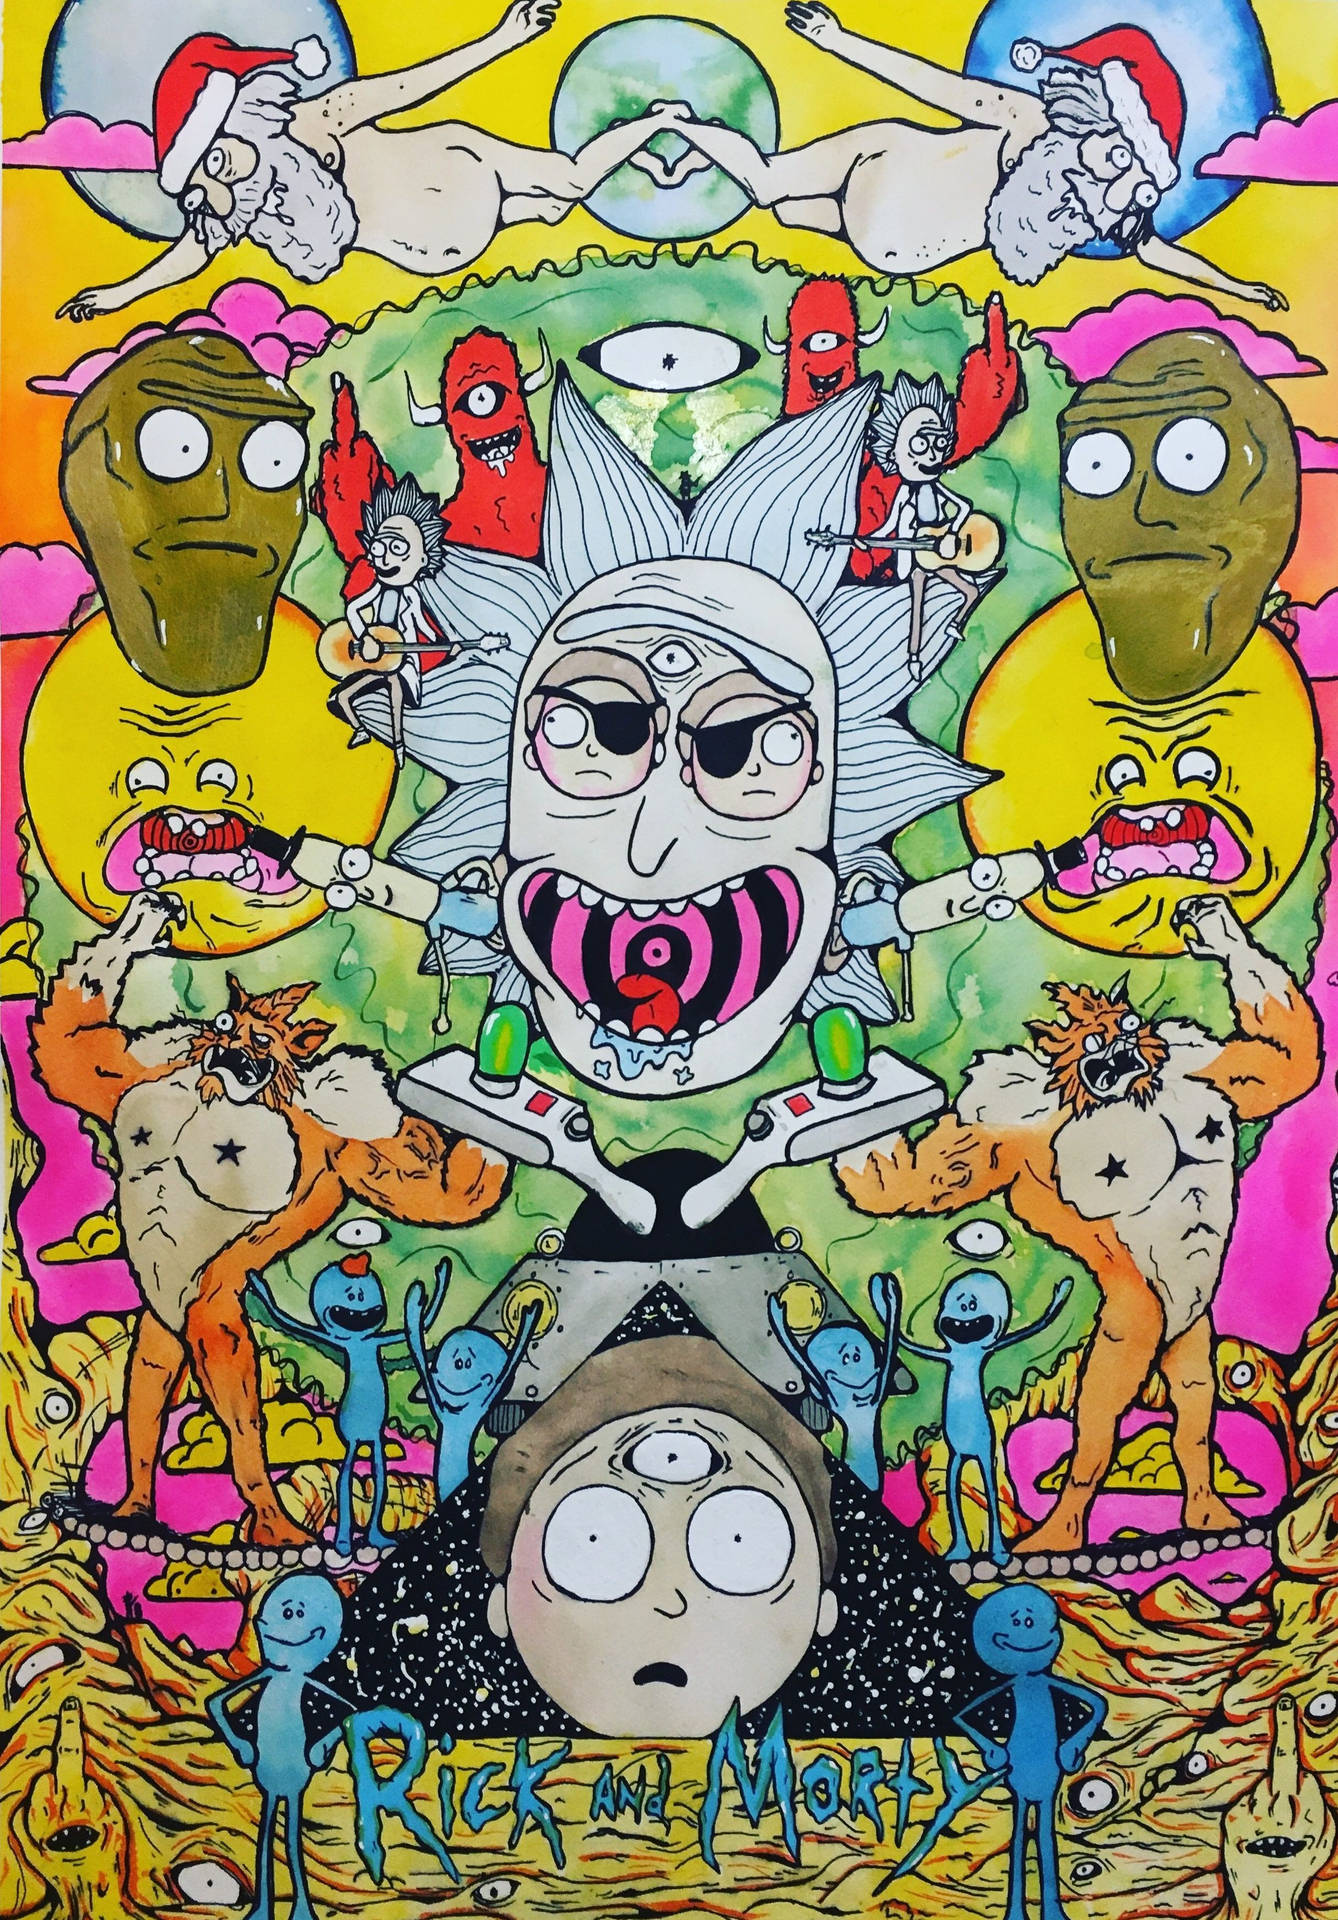 Join Rick and Morty on their outrageous adventures with pot-fueled fun! Wallpaper